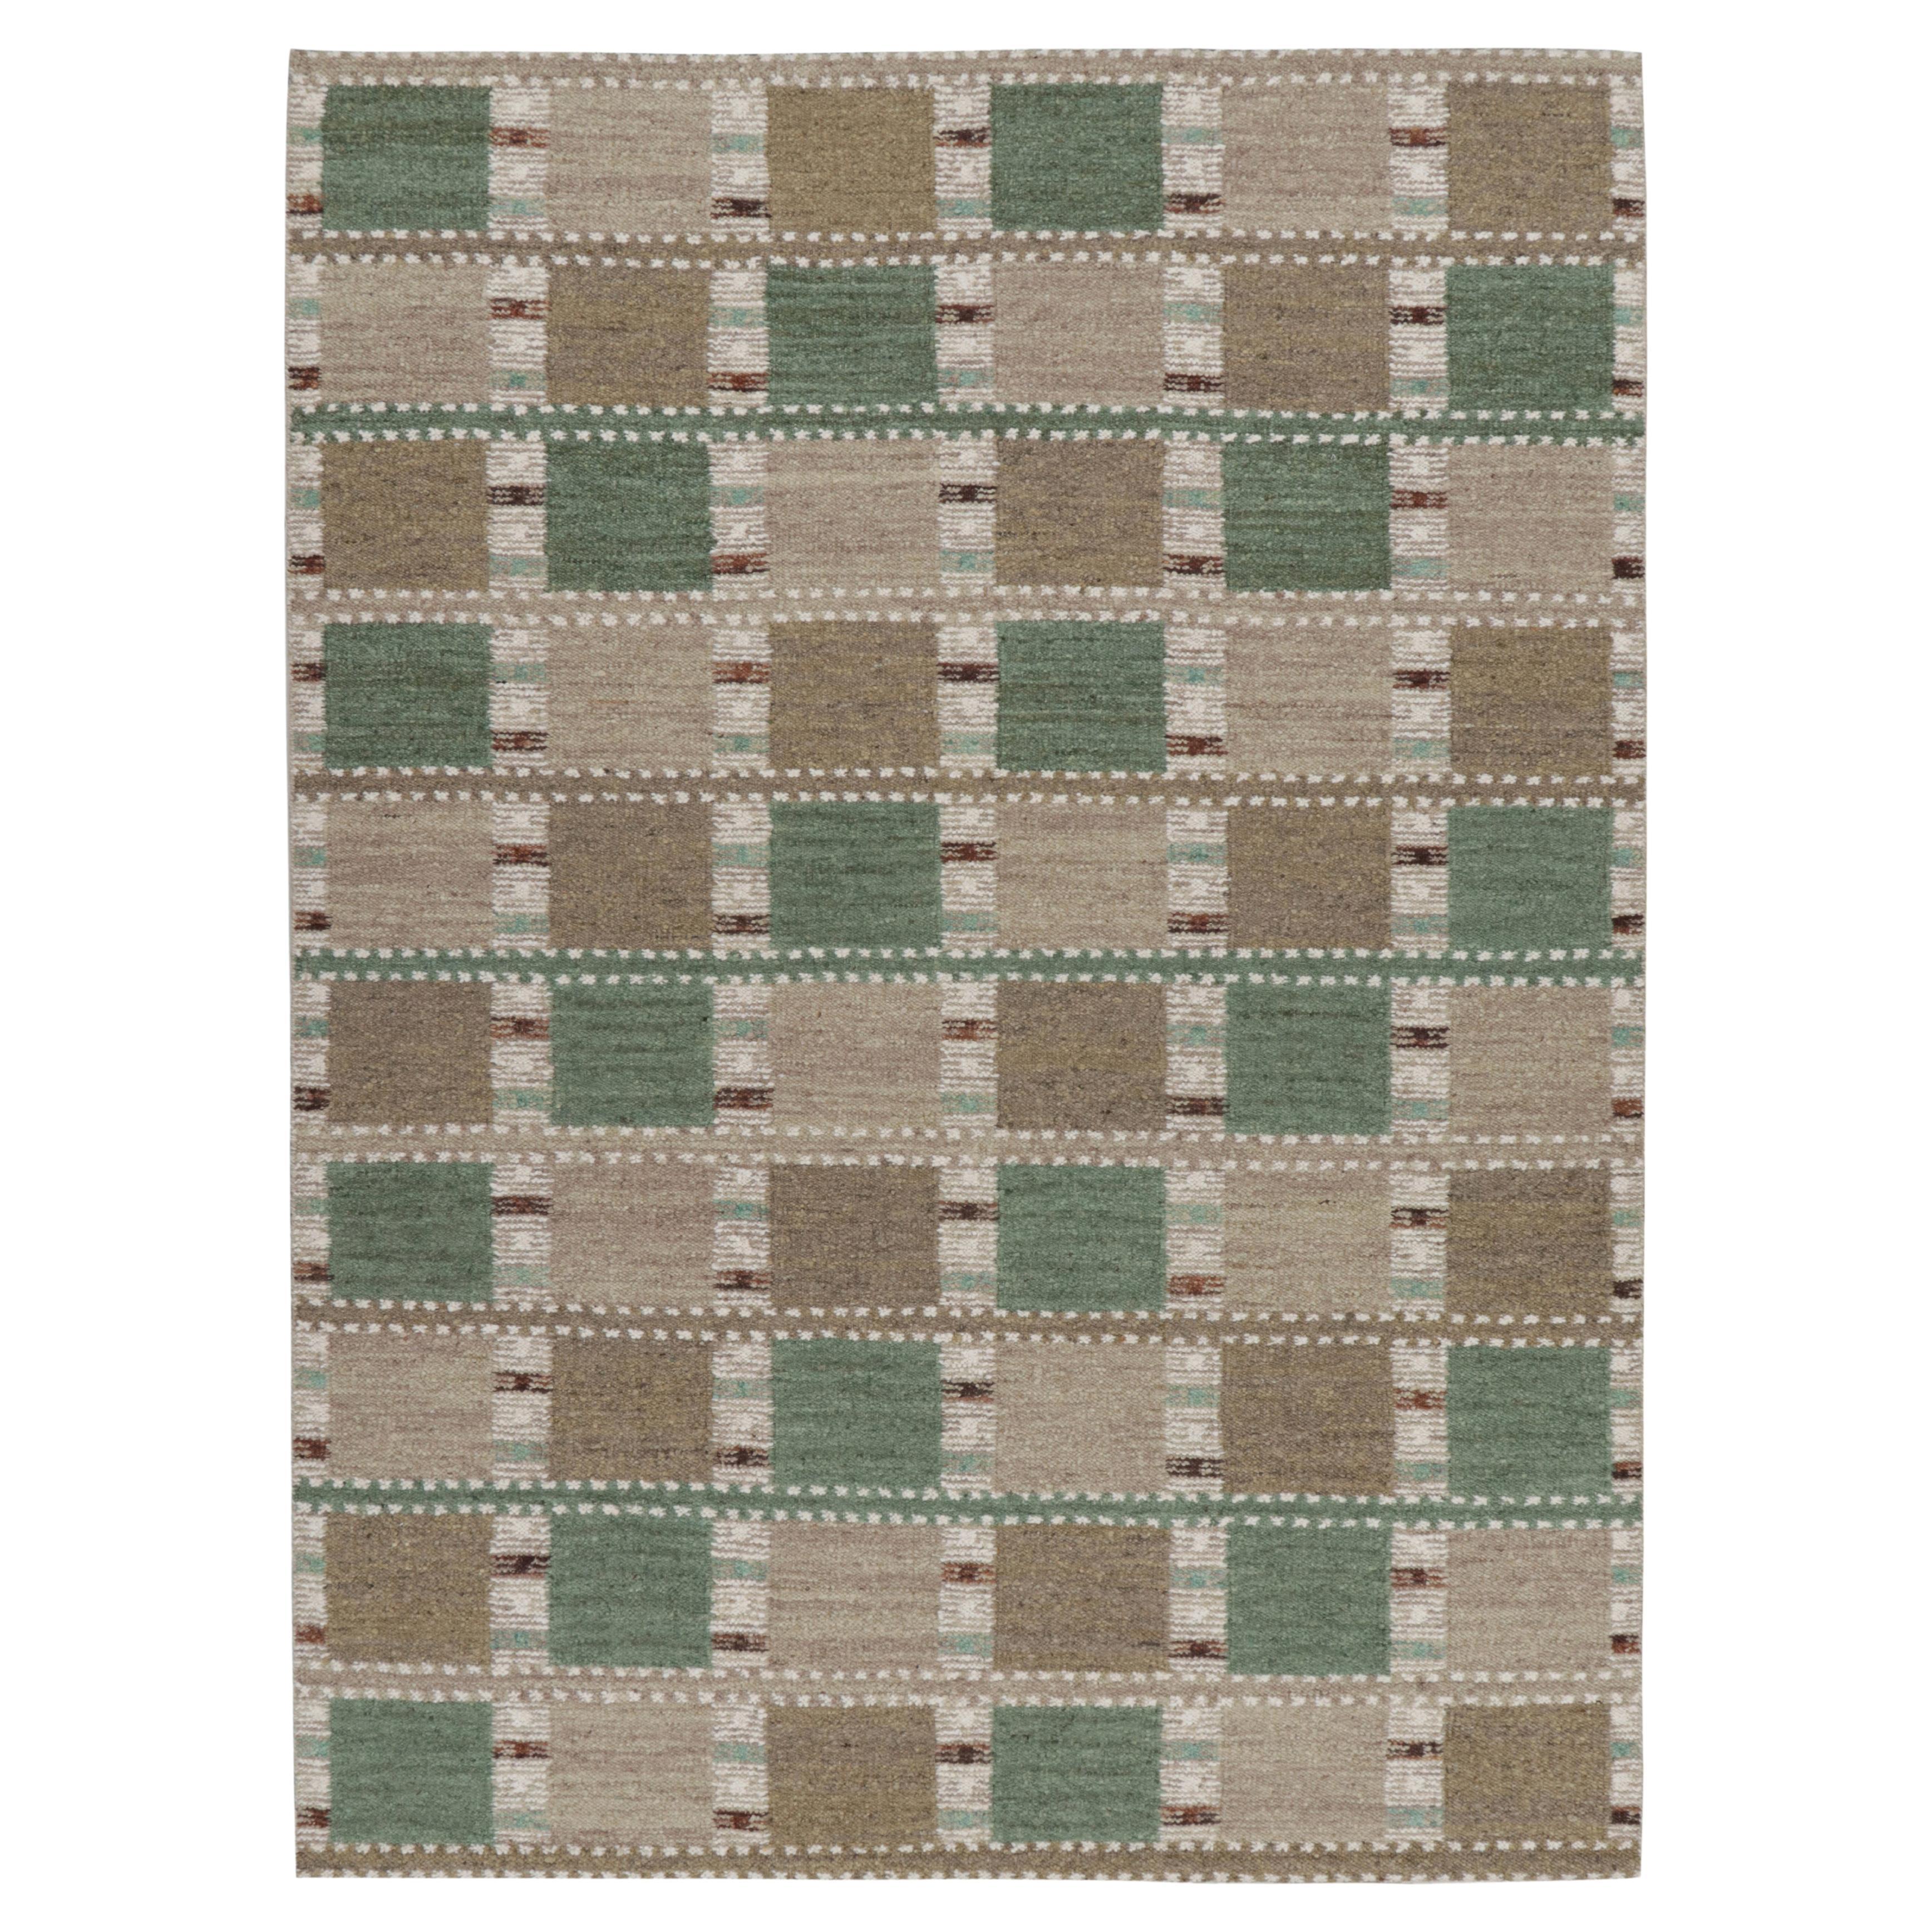 Rug & Kilim’s Scandinavian Style Rug in Green and Beige-Brown with Patterns